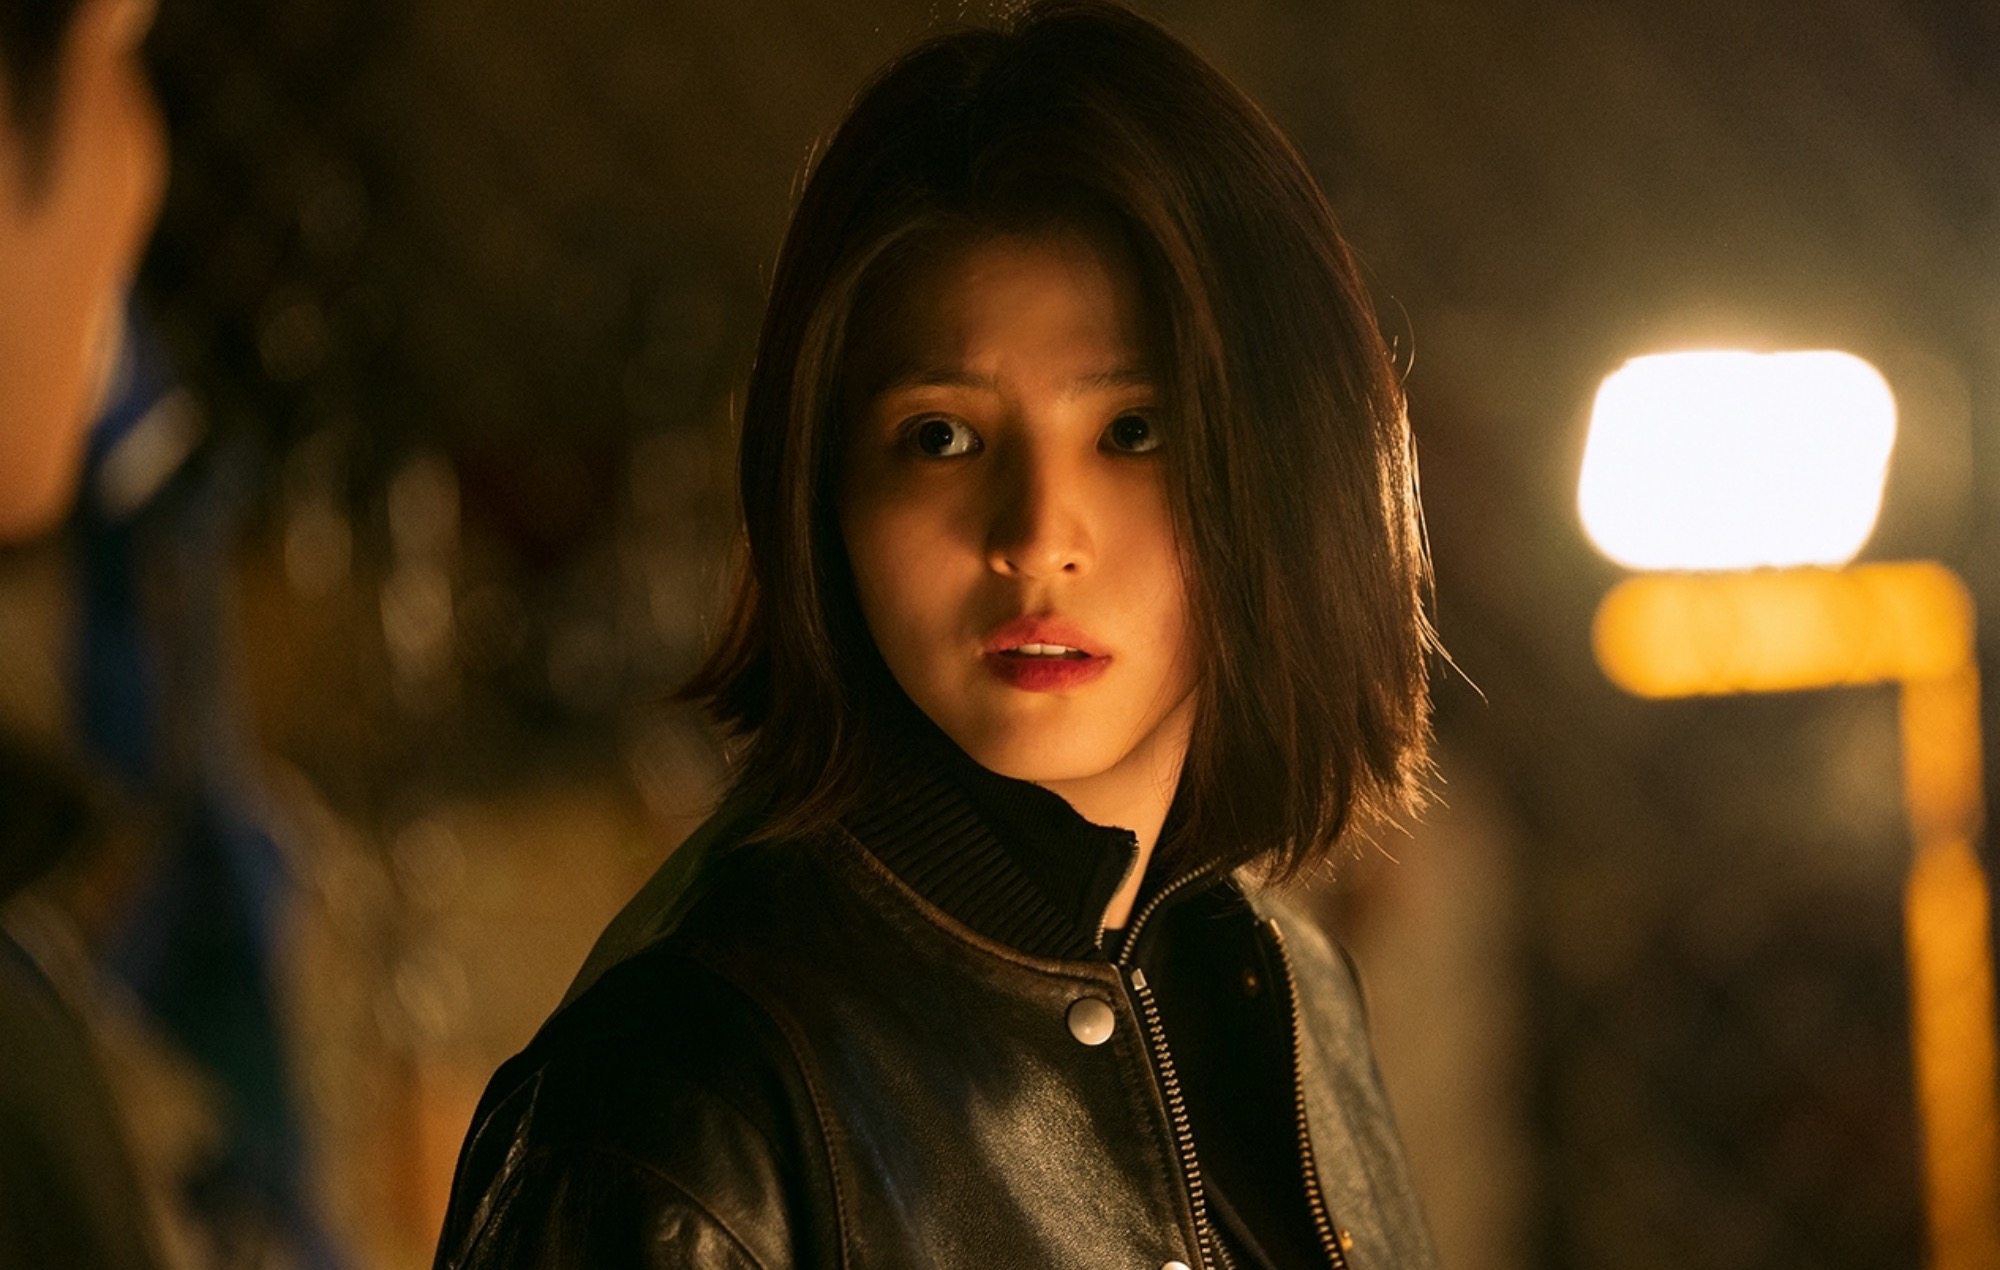 Han So-hee in a still from “My Name”. Photo: Netflix